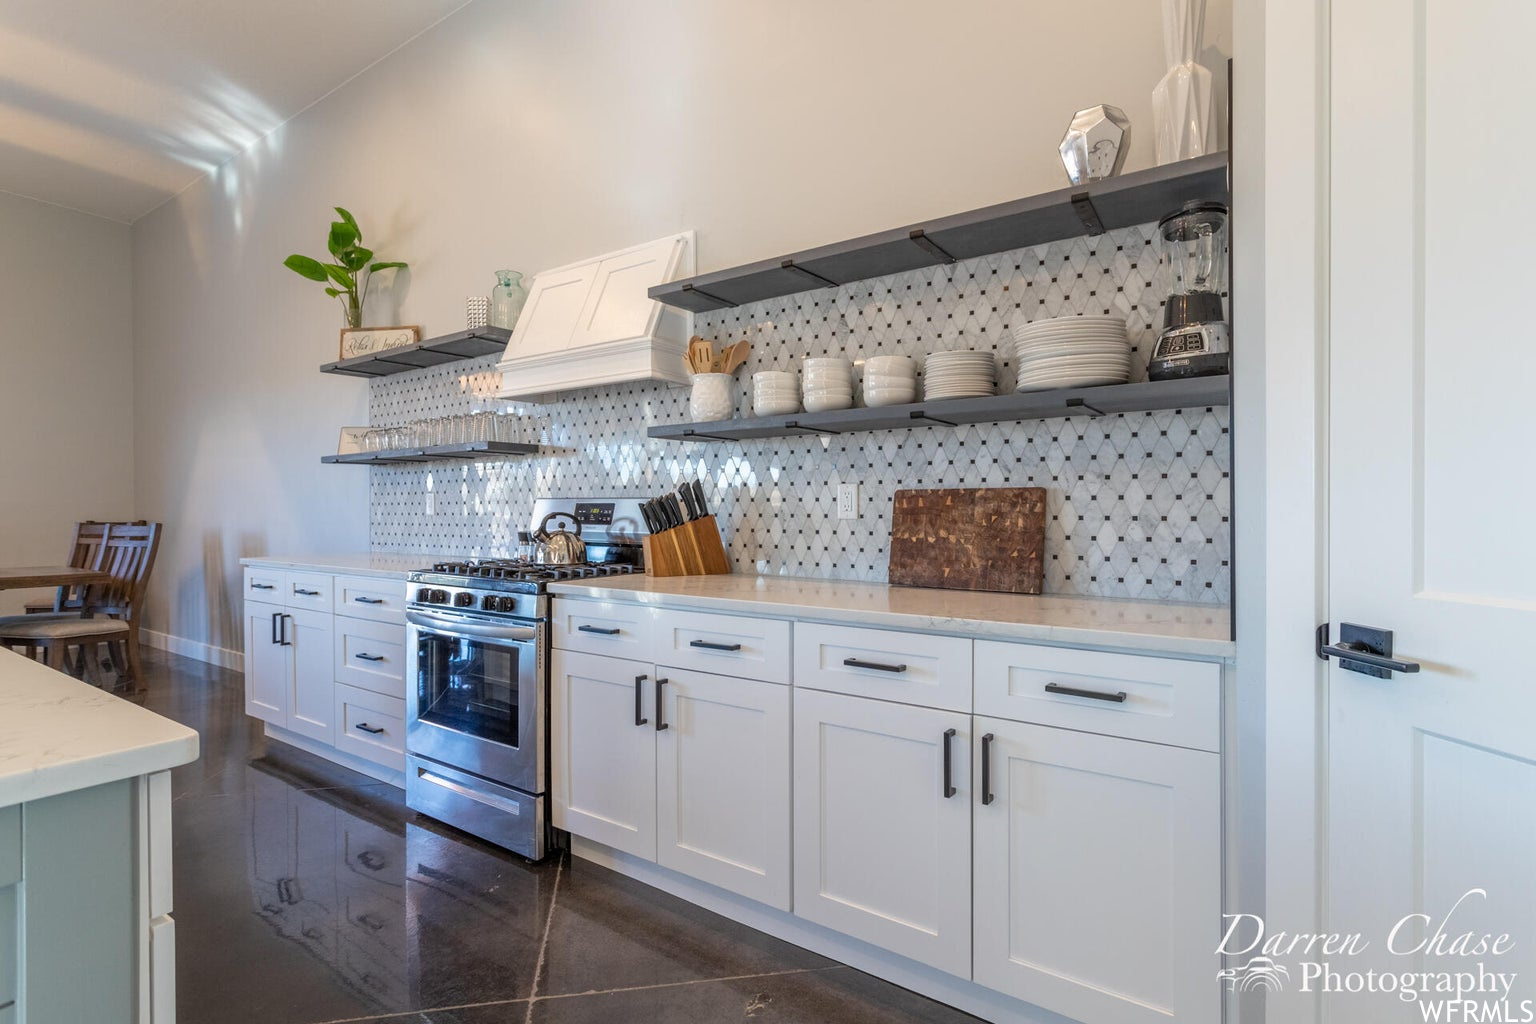 Kitchen featuring gas range oven, stainless steel finishes, light countertops, and white cabinets